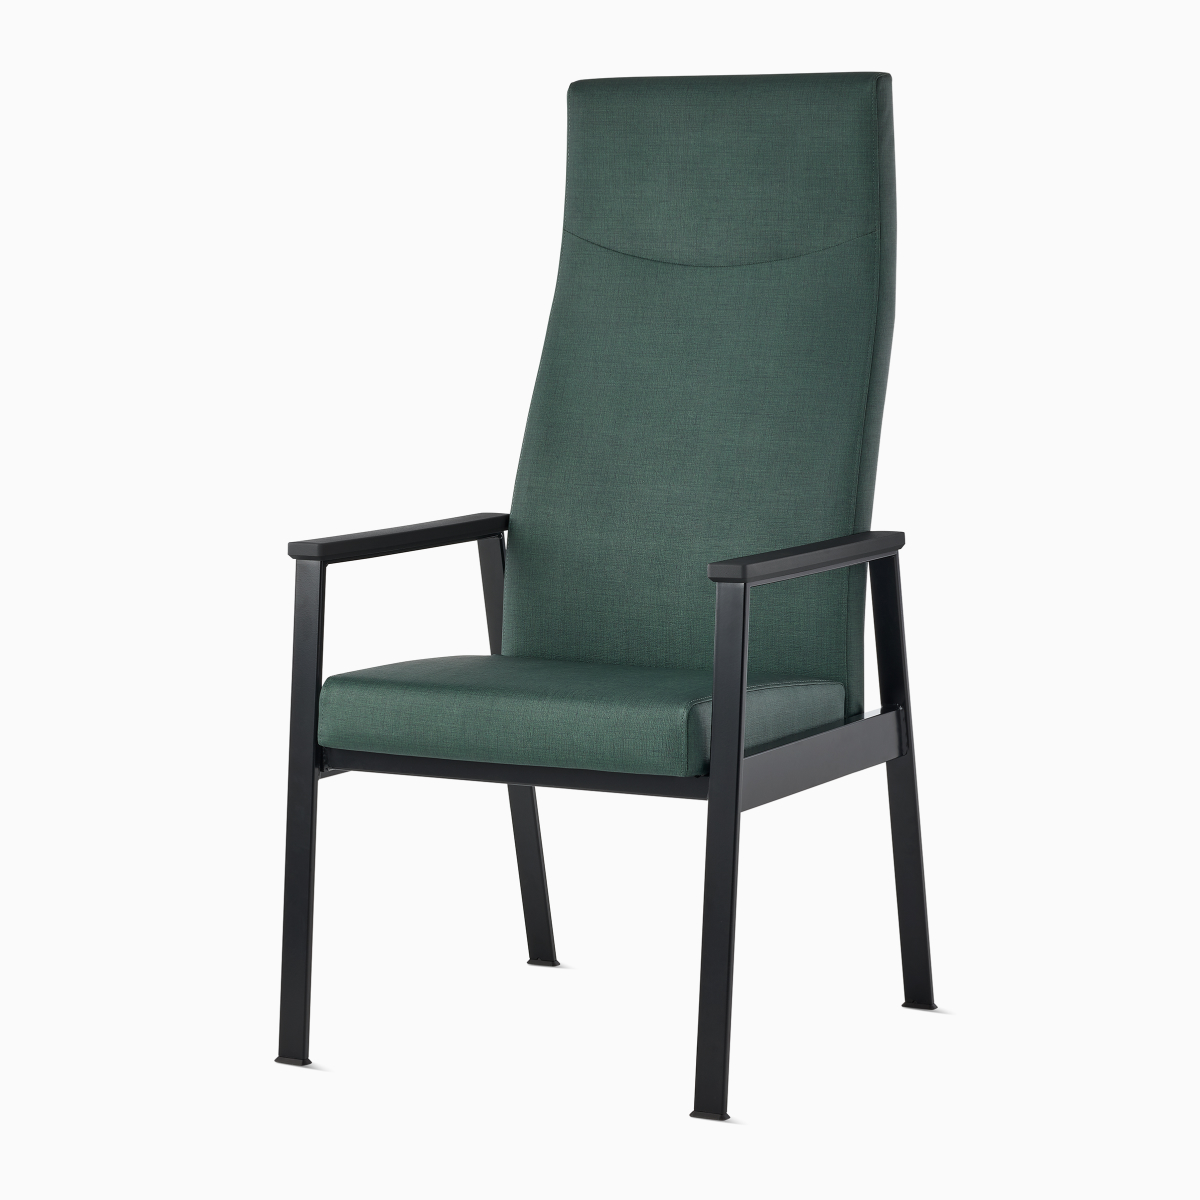 Front-angle view of an Easton Patient Chair with green upholstery, black four-leg base, and black arm caps.